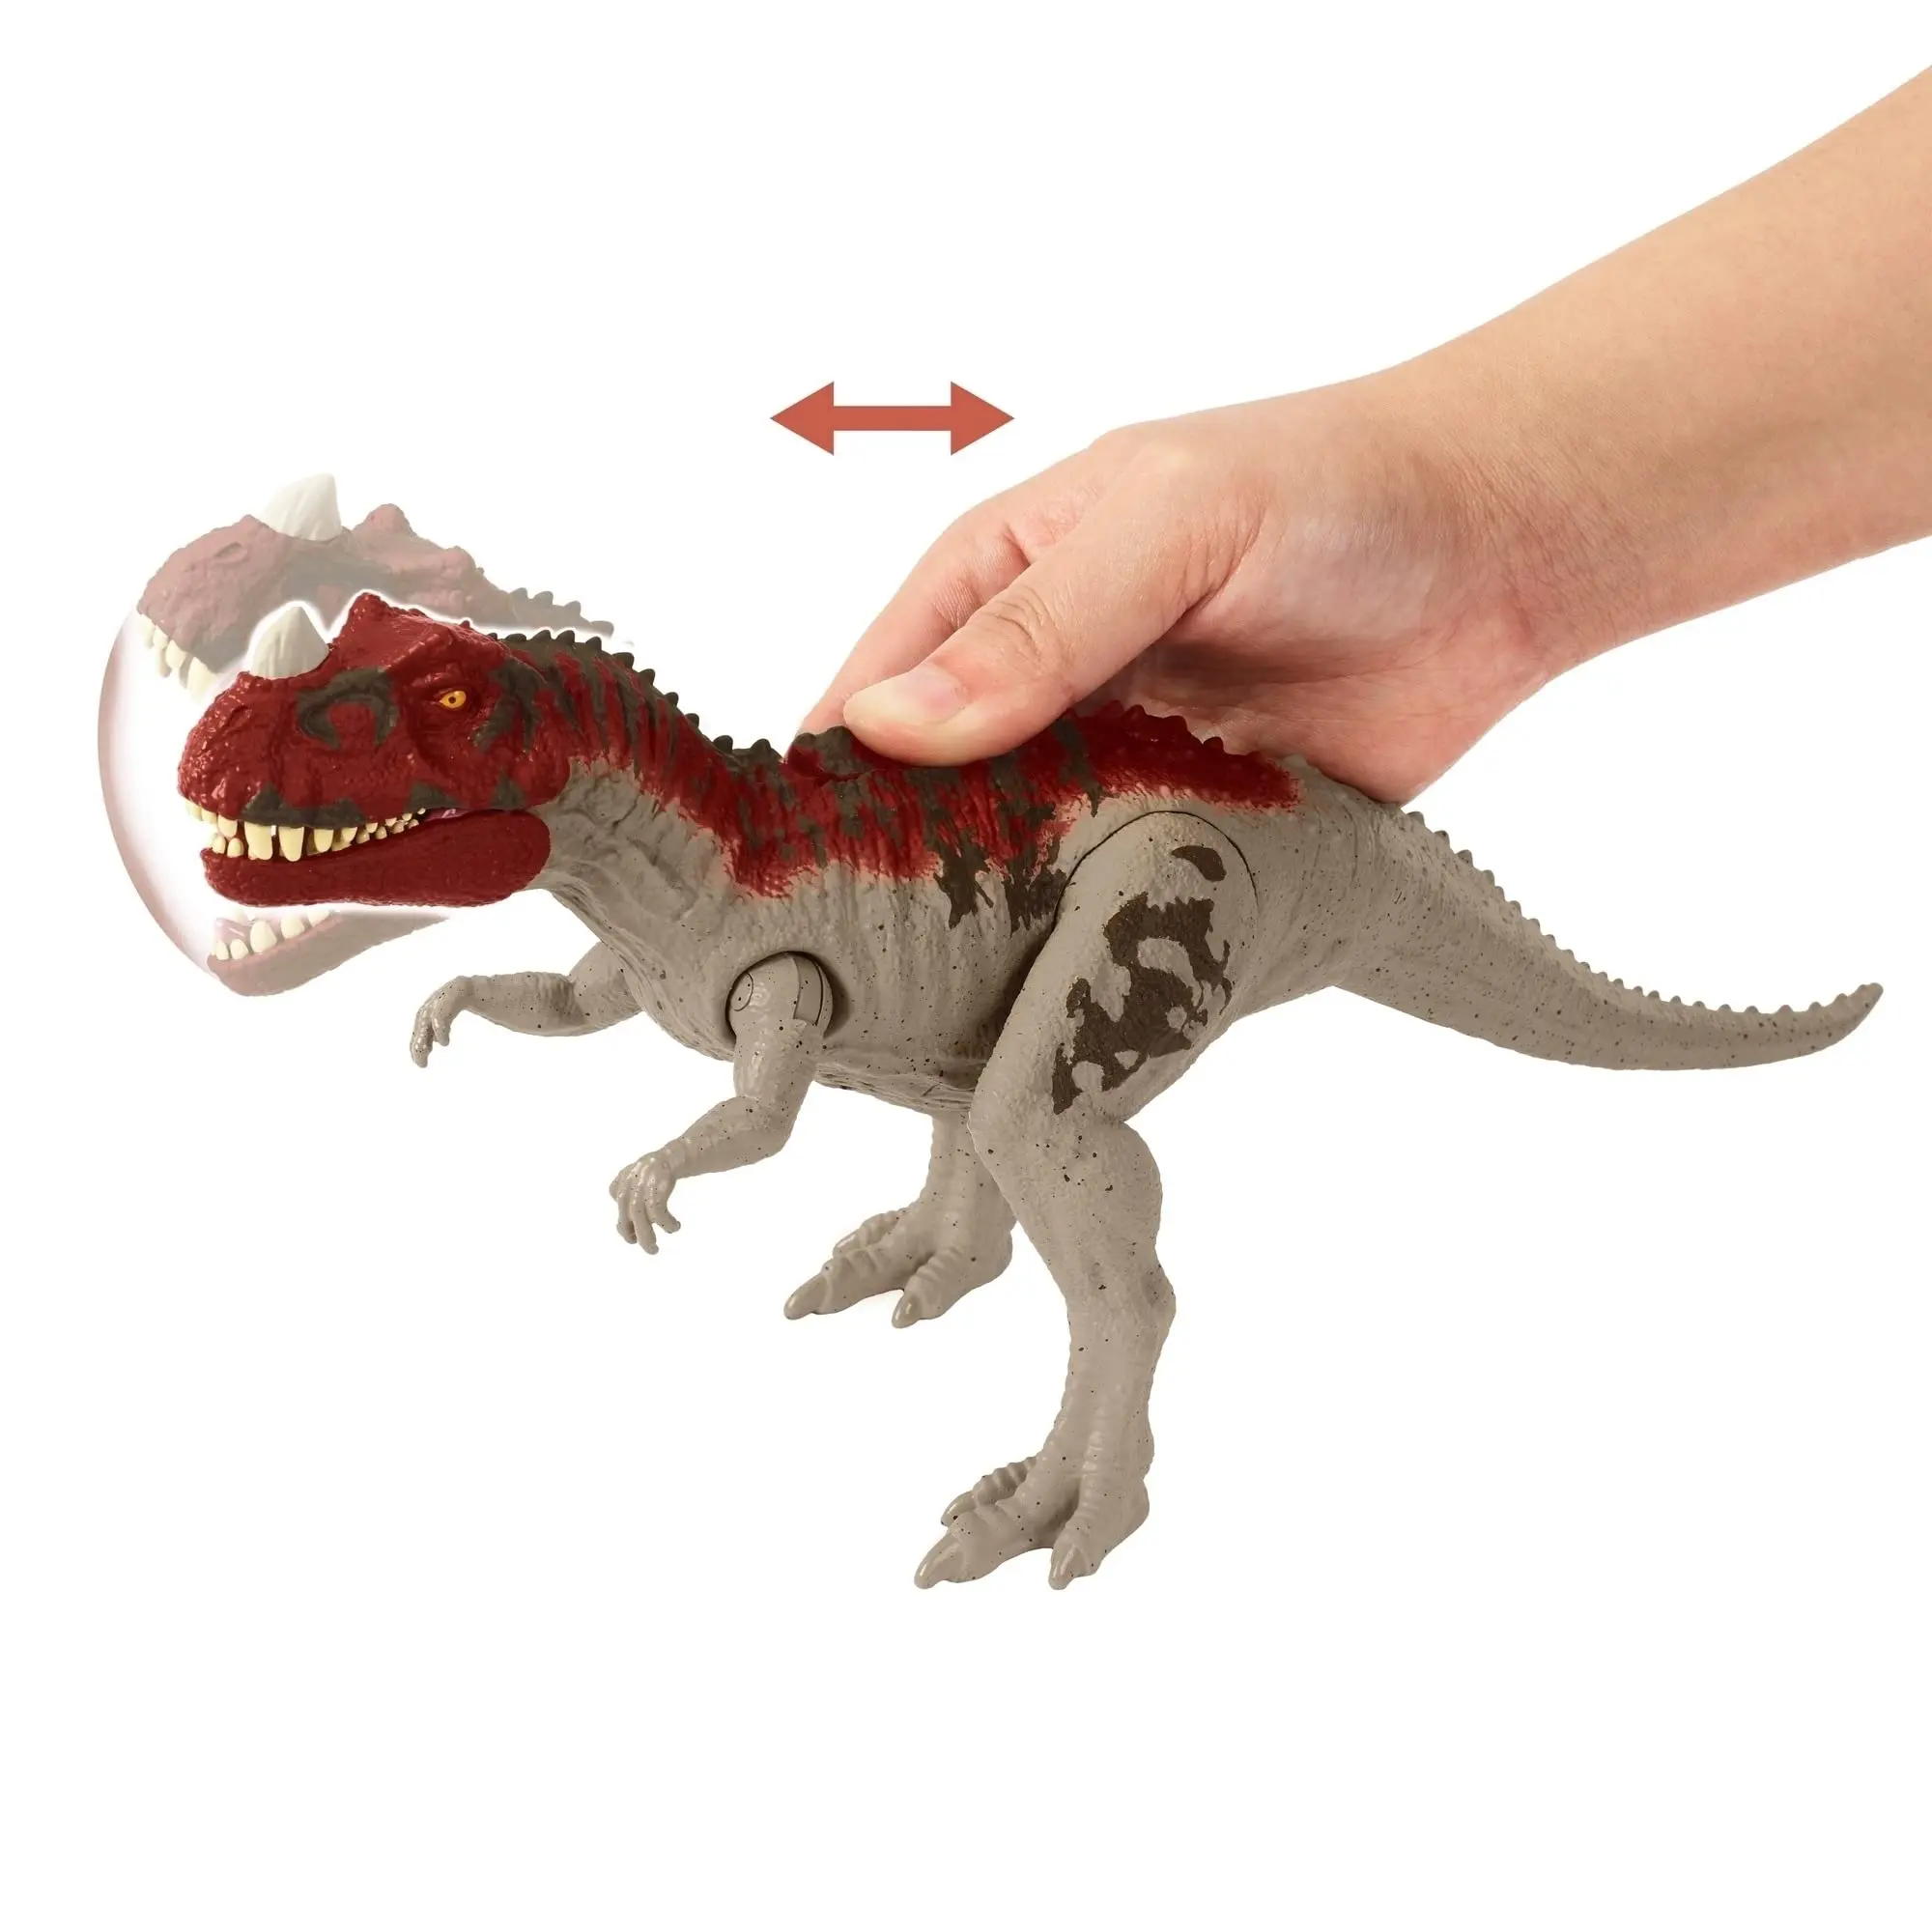 Jurassic World Camp Cretaceous Roar Attack Ceratosaurus Dinosaur with Strike Sounds Action Toy for Kids Birthday Gift GWD07 enlarge